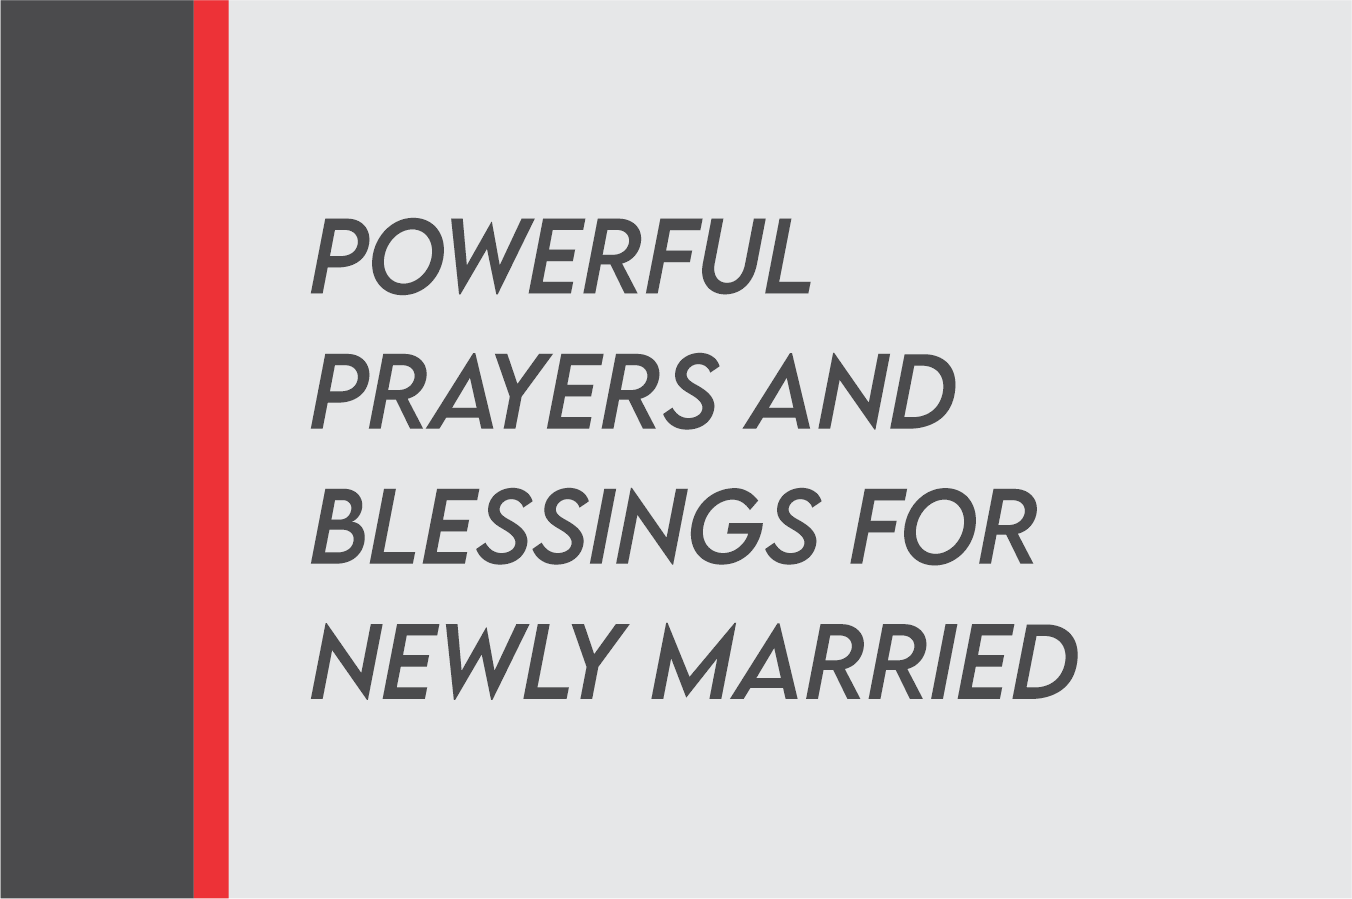 Short Prayer For Newly Married Couple